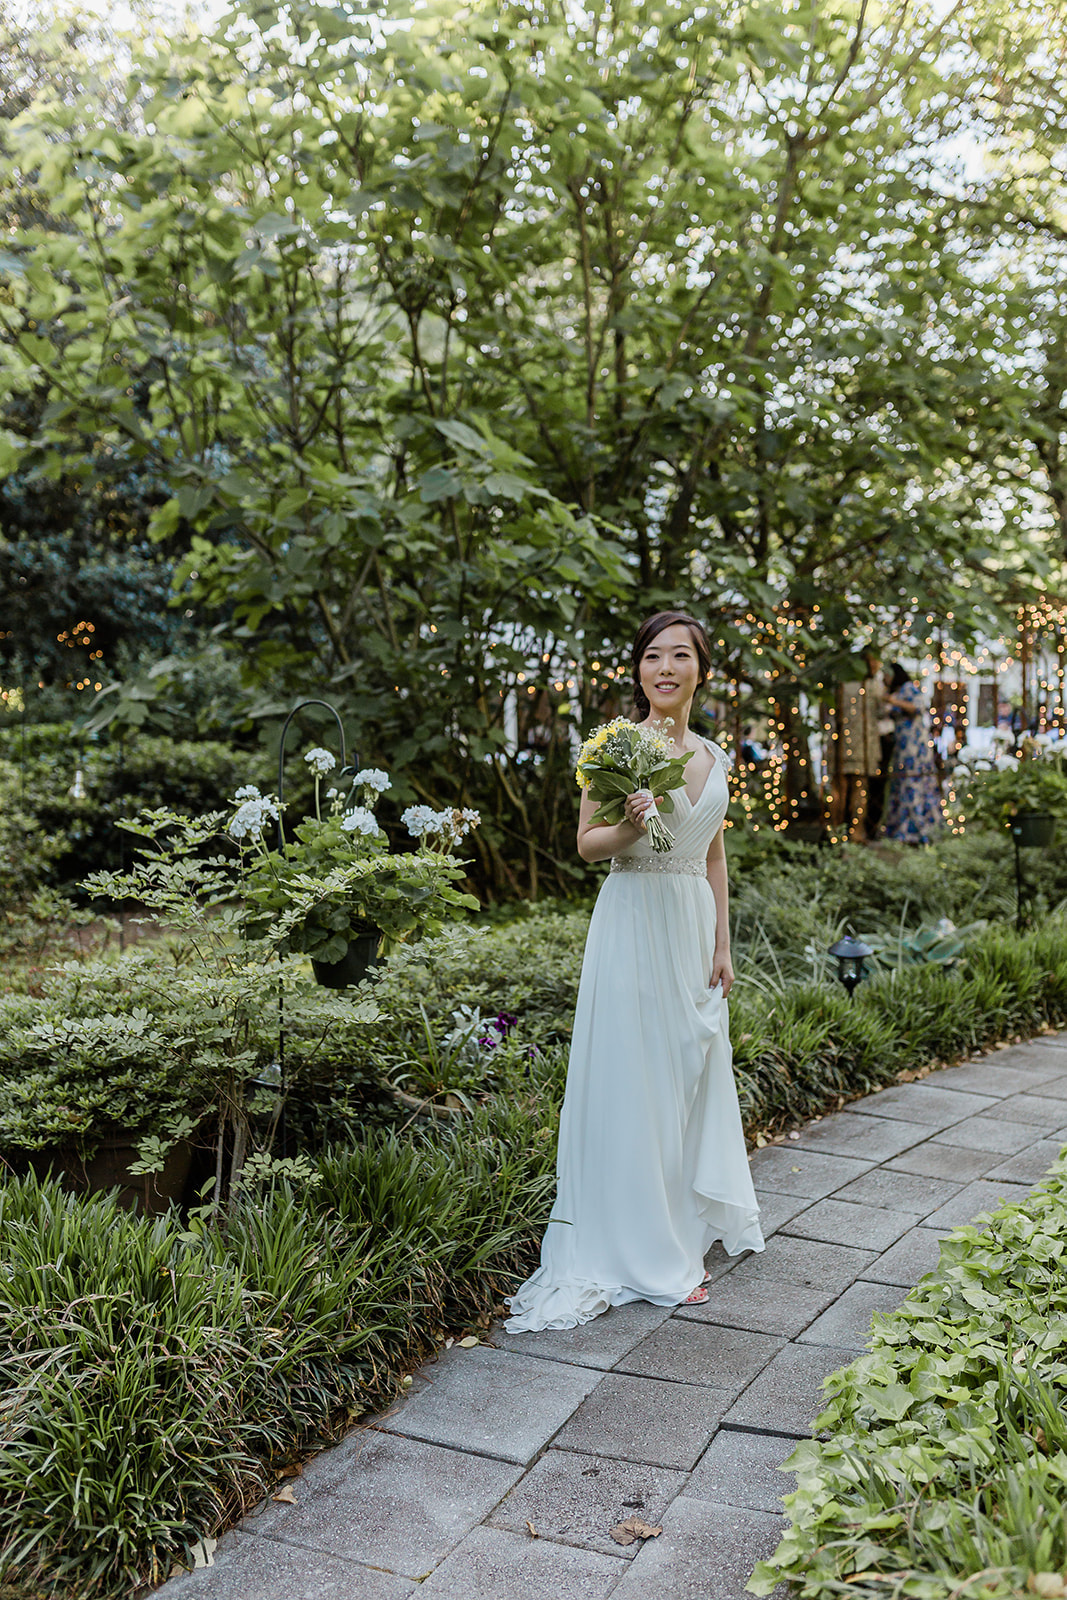 bride standing along garden path with potted plants and lush greenery